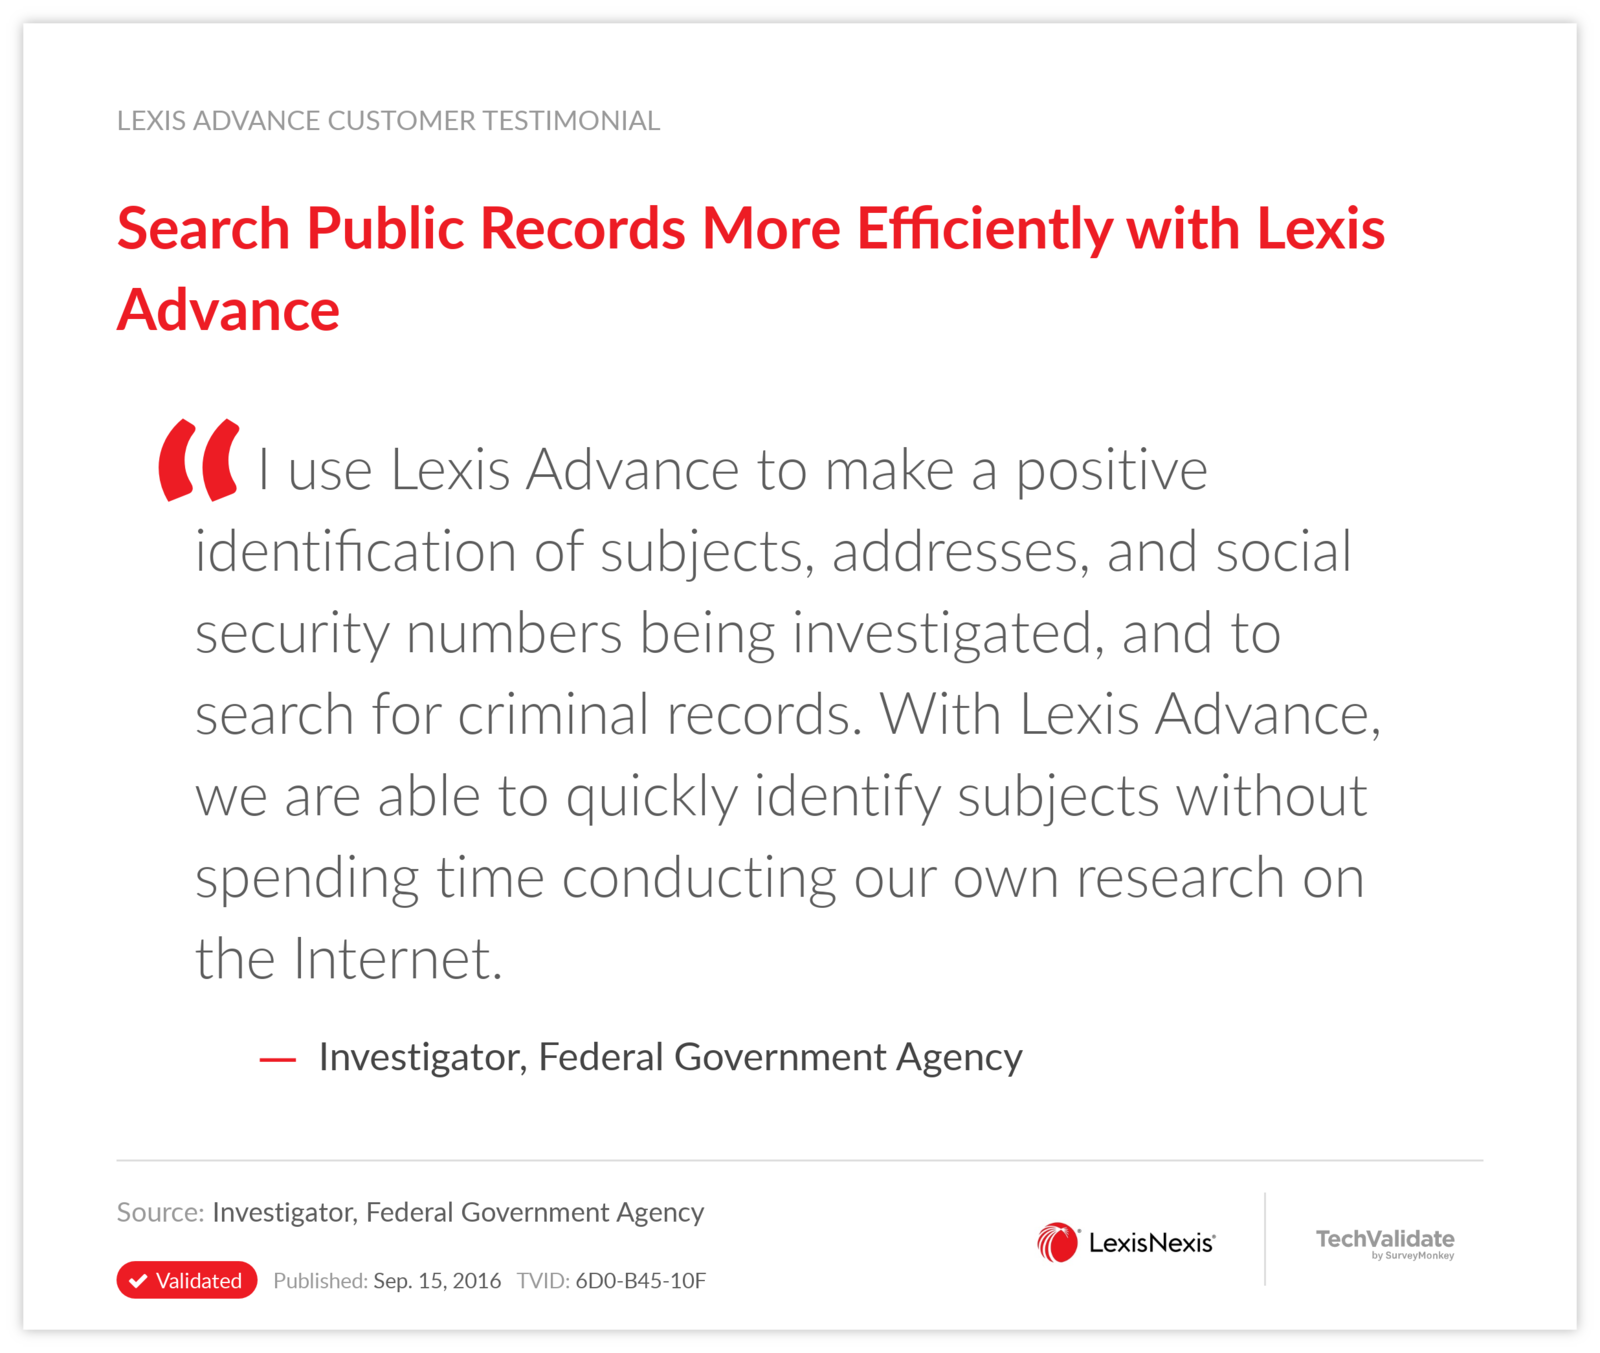 Search Public Records More Efficiently with Lexis Advance